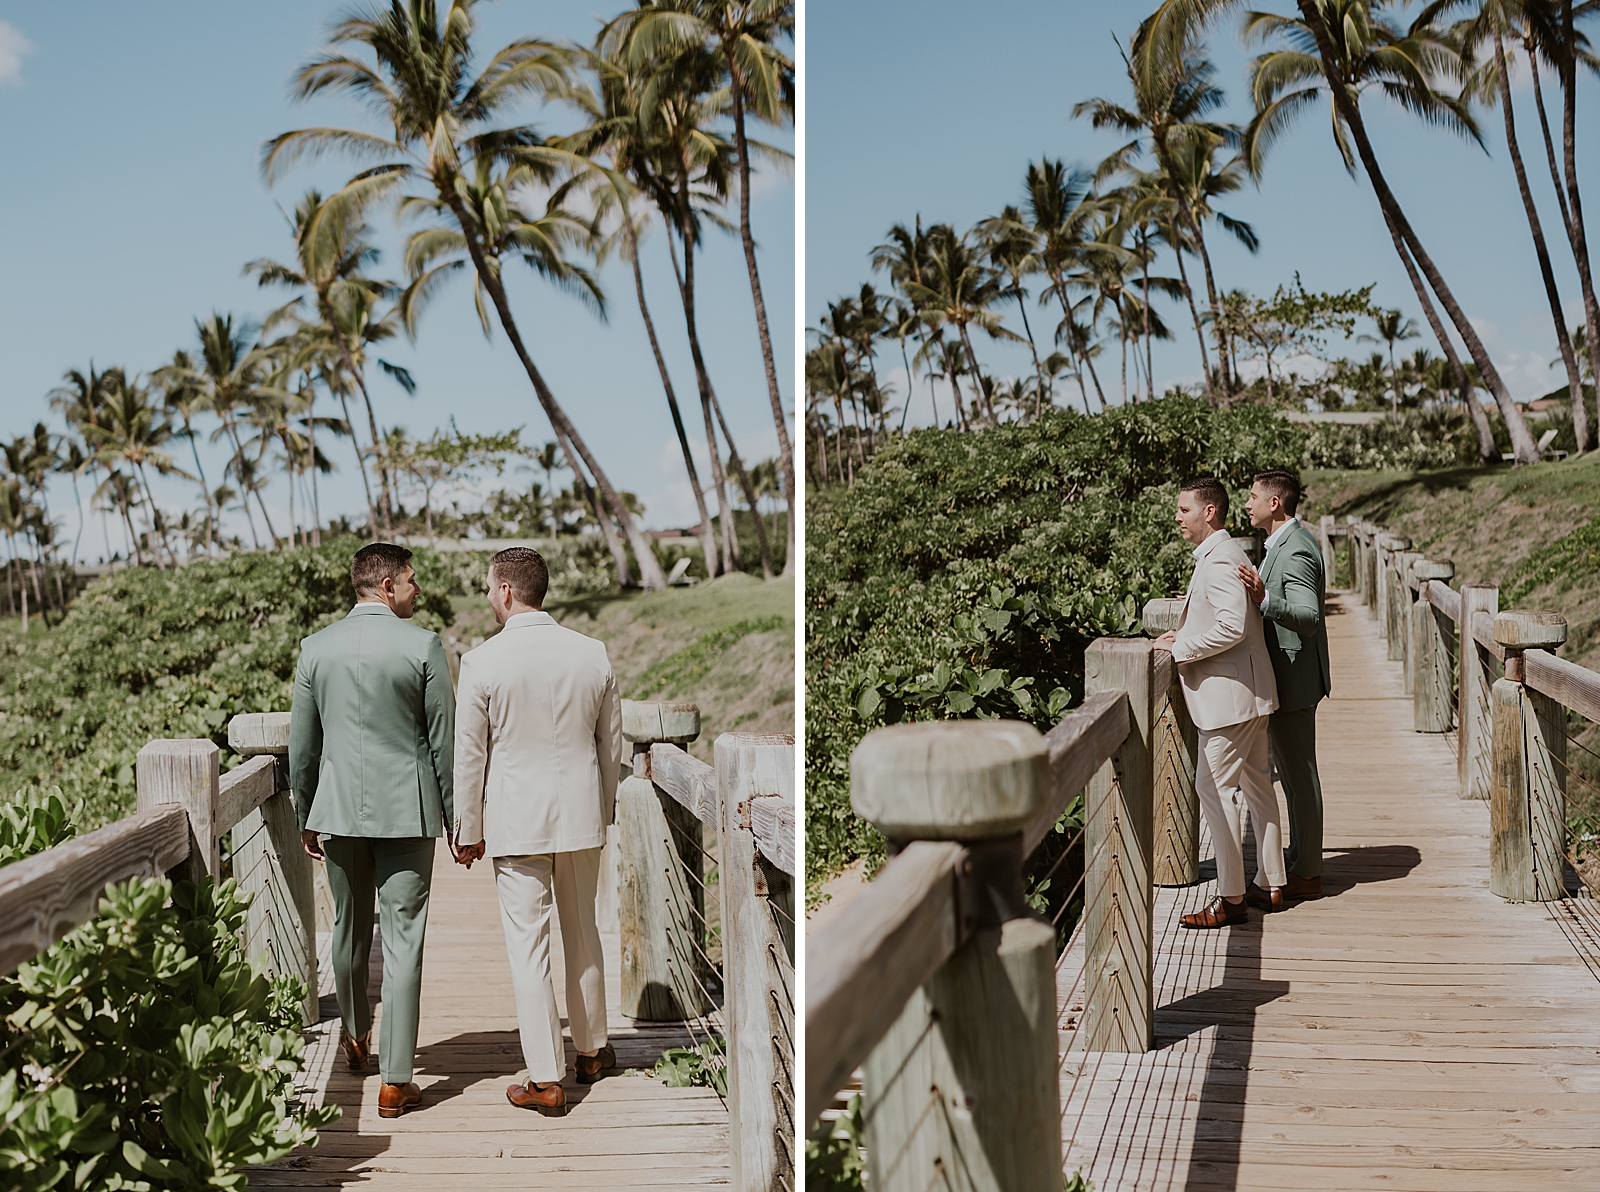 Grooms walking on beach boardwalk and looking out at the ocean 